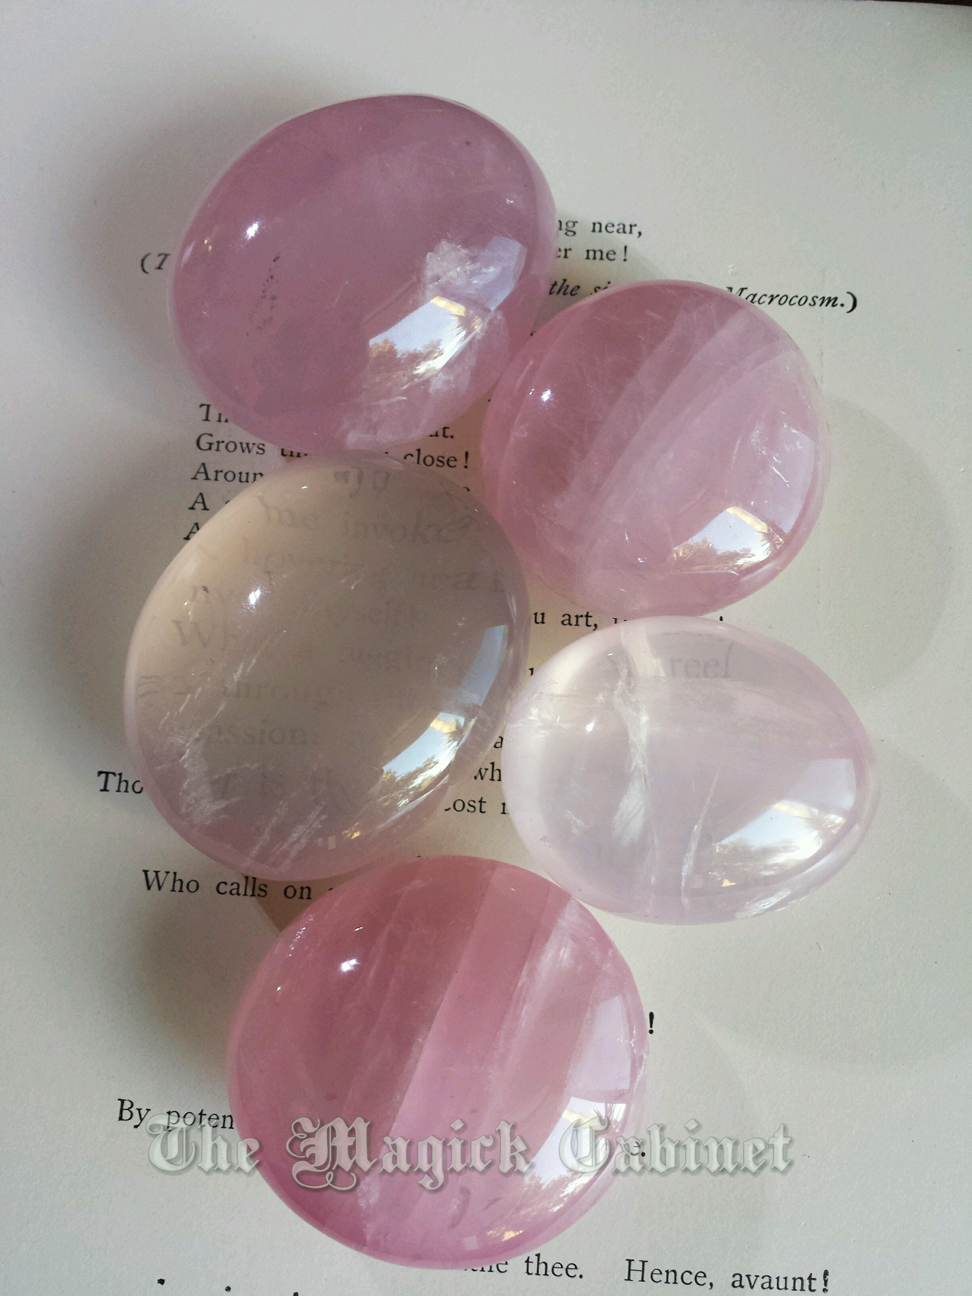 Rose Quartz Palm Stones For Self Love Forgiveness And Bringing In Loving Vibrations Healing Crystals